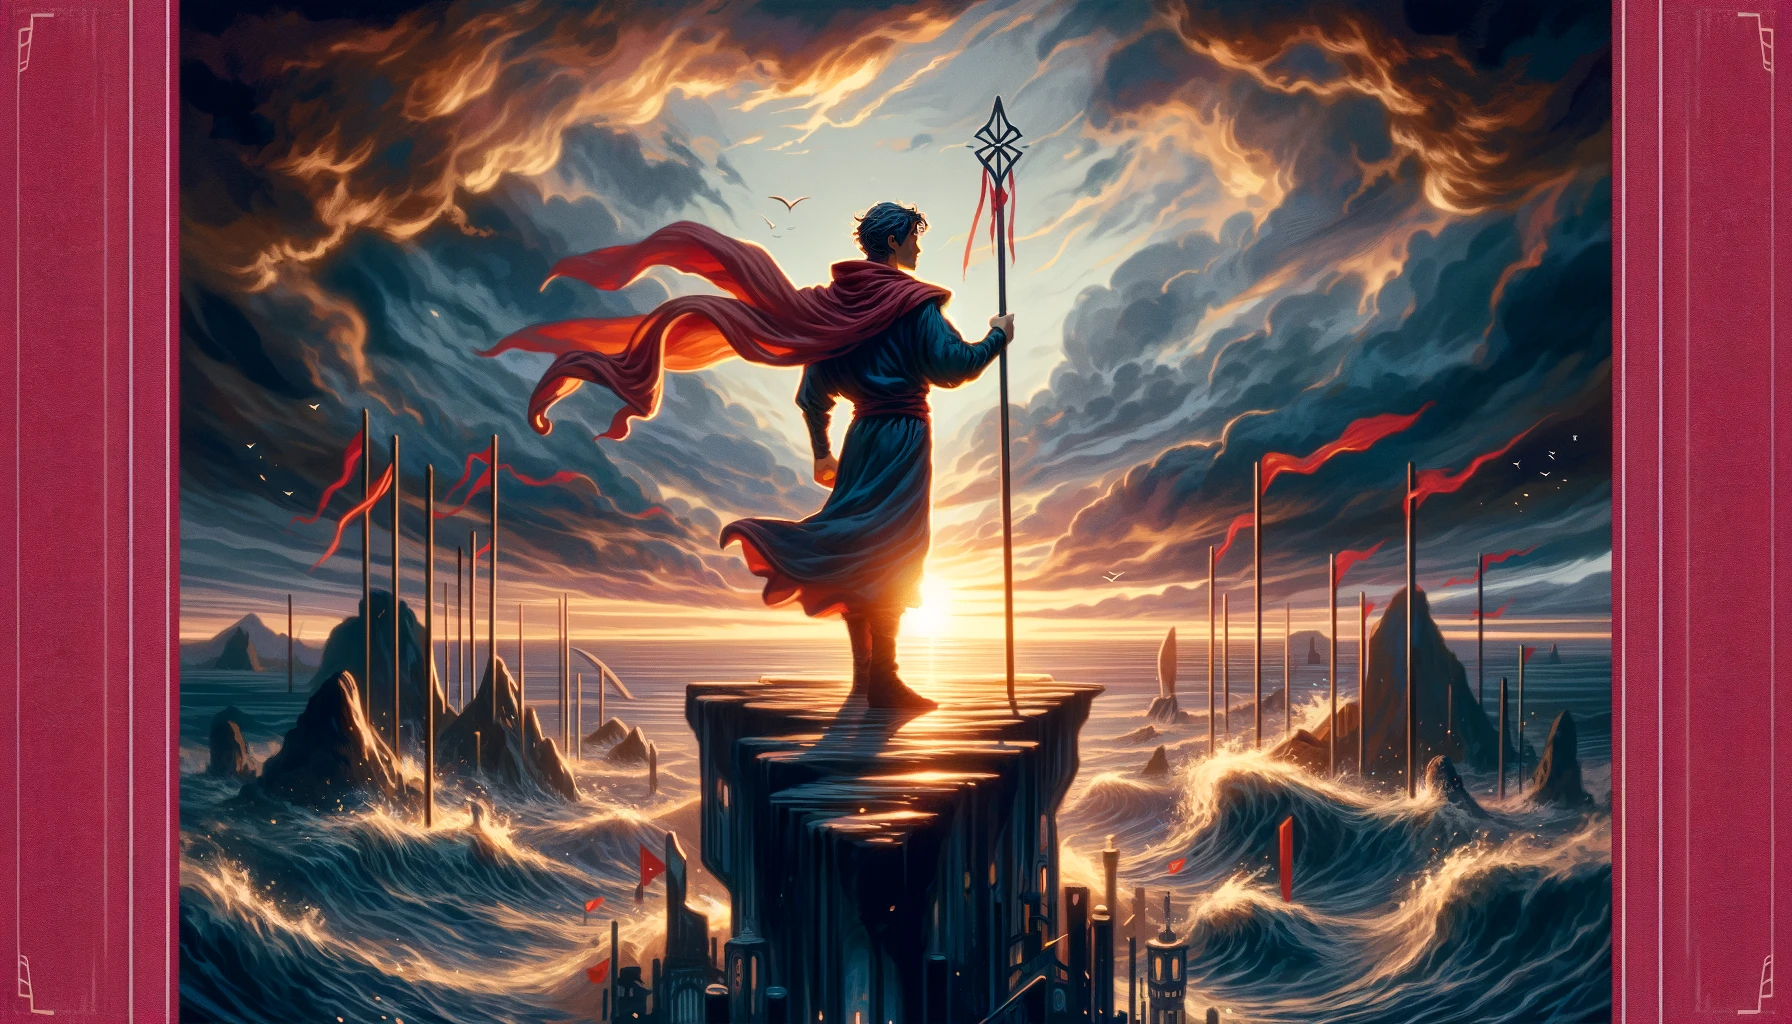 An image of an individual standing firm against opposition, demonstrating courage and determination. The backdrop, possibly stormy, accentuates the adversities faced, while